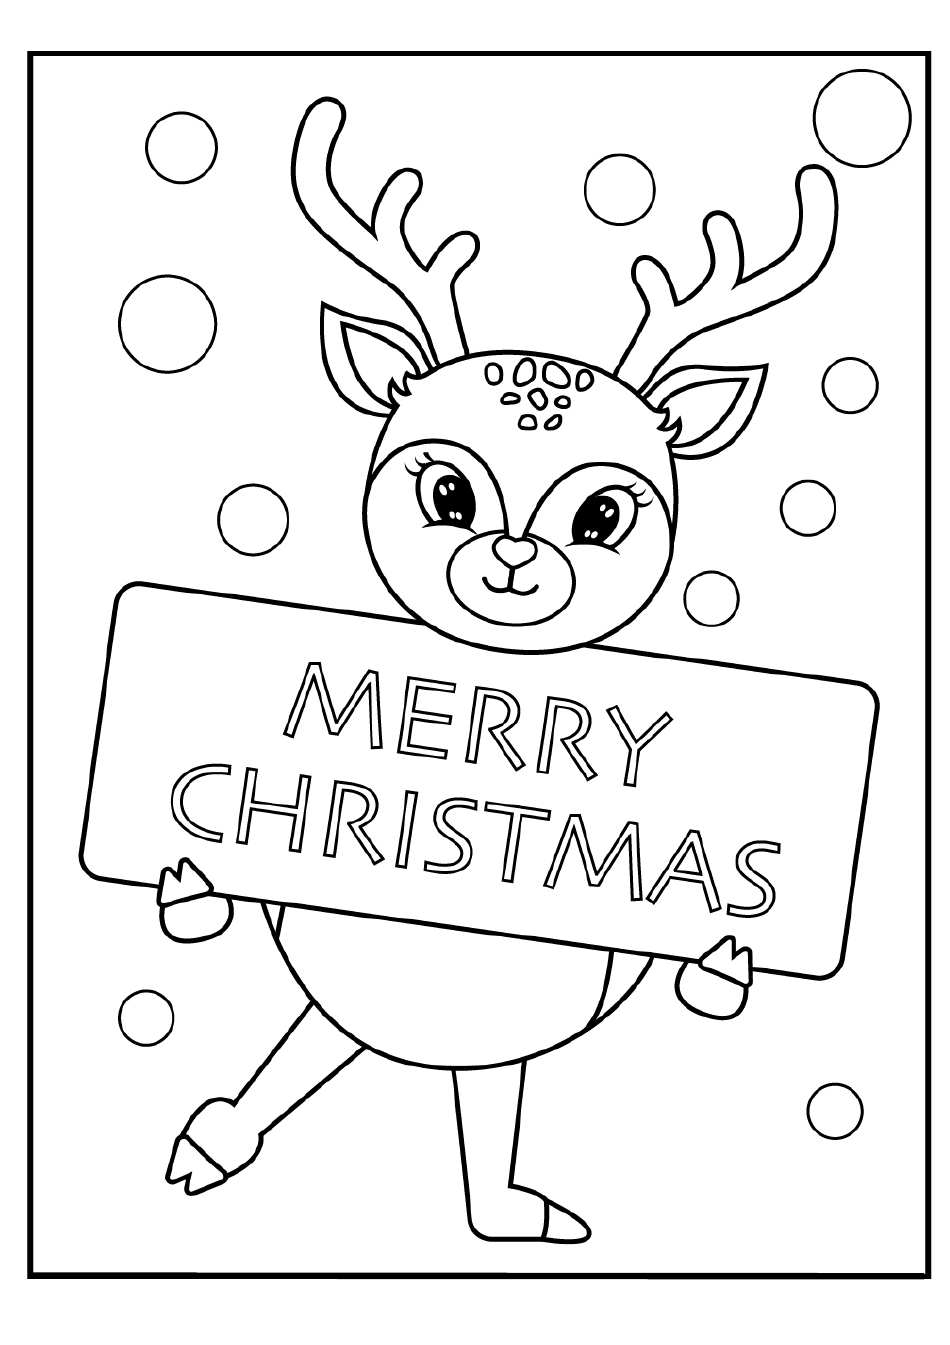 Reindeer Coloring Pages - Merry Christmas Download Printable PDF ...